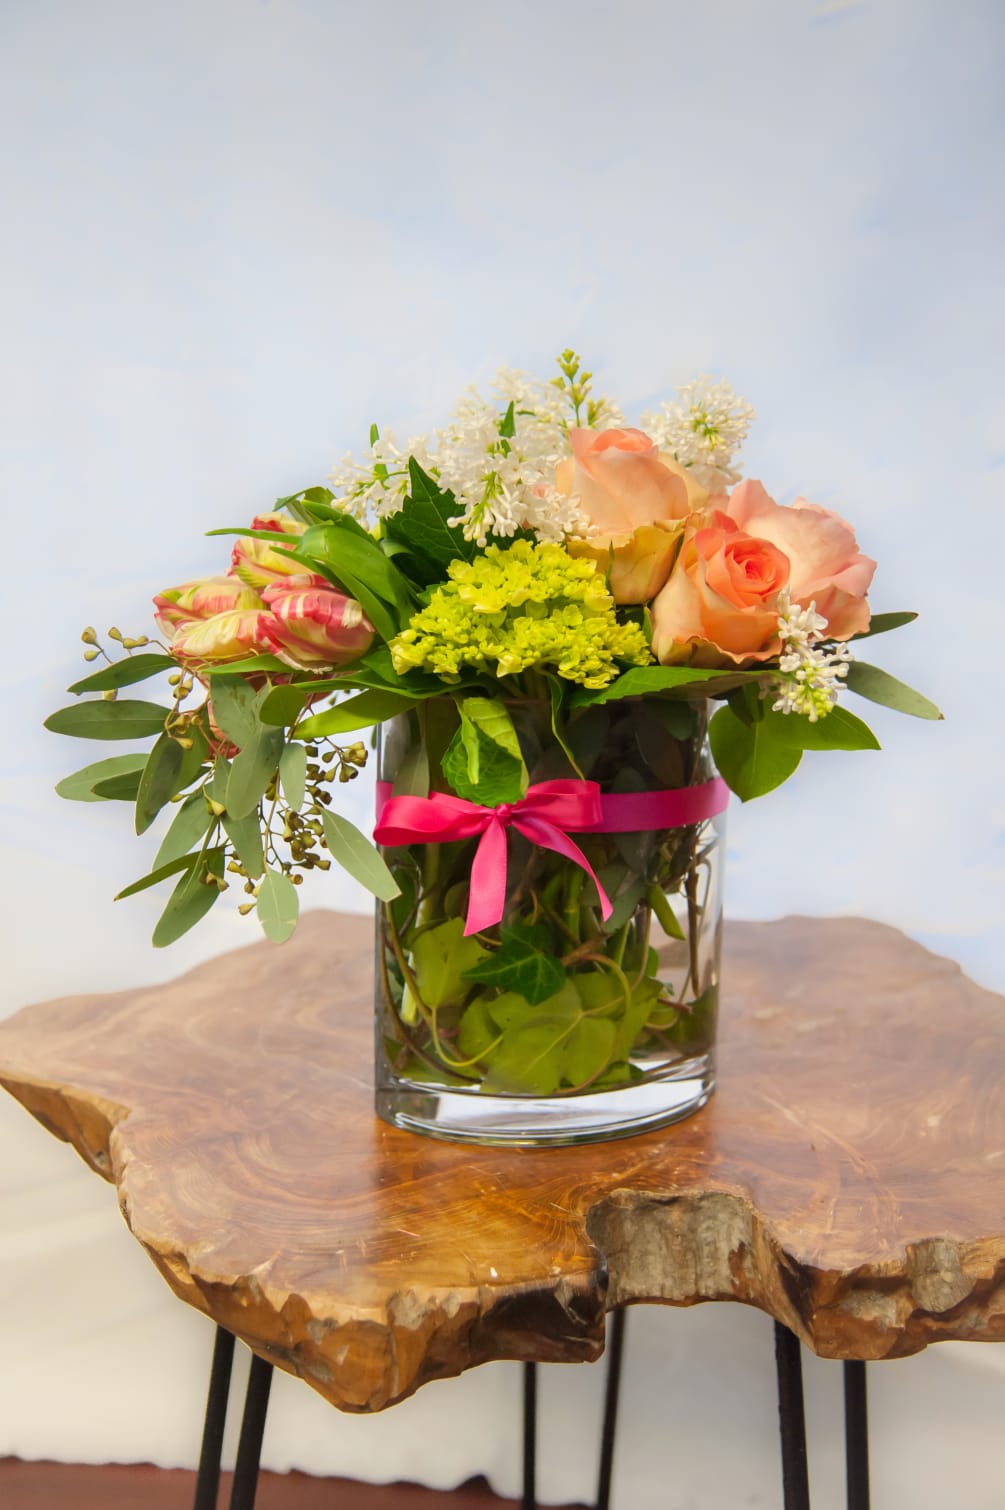 French tulips, hydrangea, roses, and seeded eucalyptus arranged in a modern oval